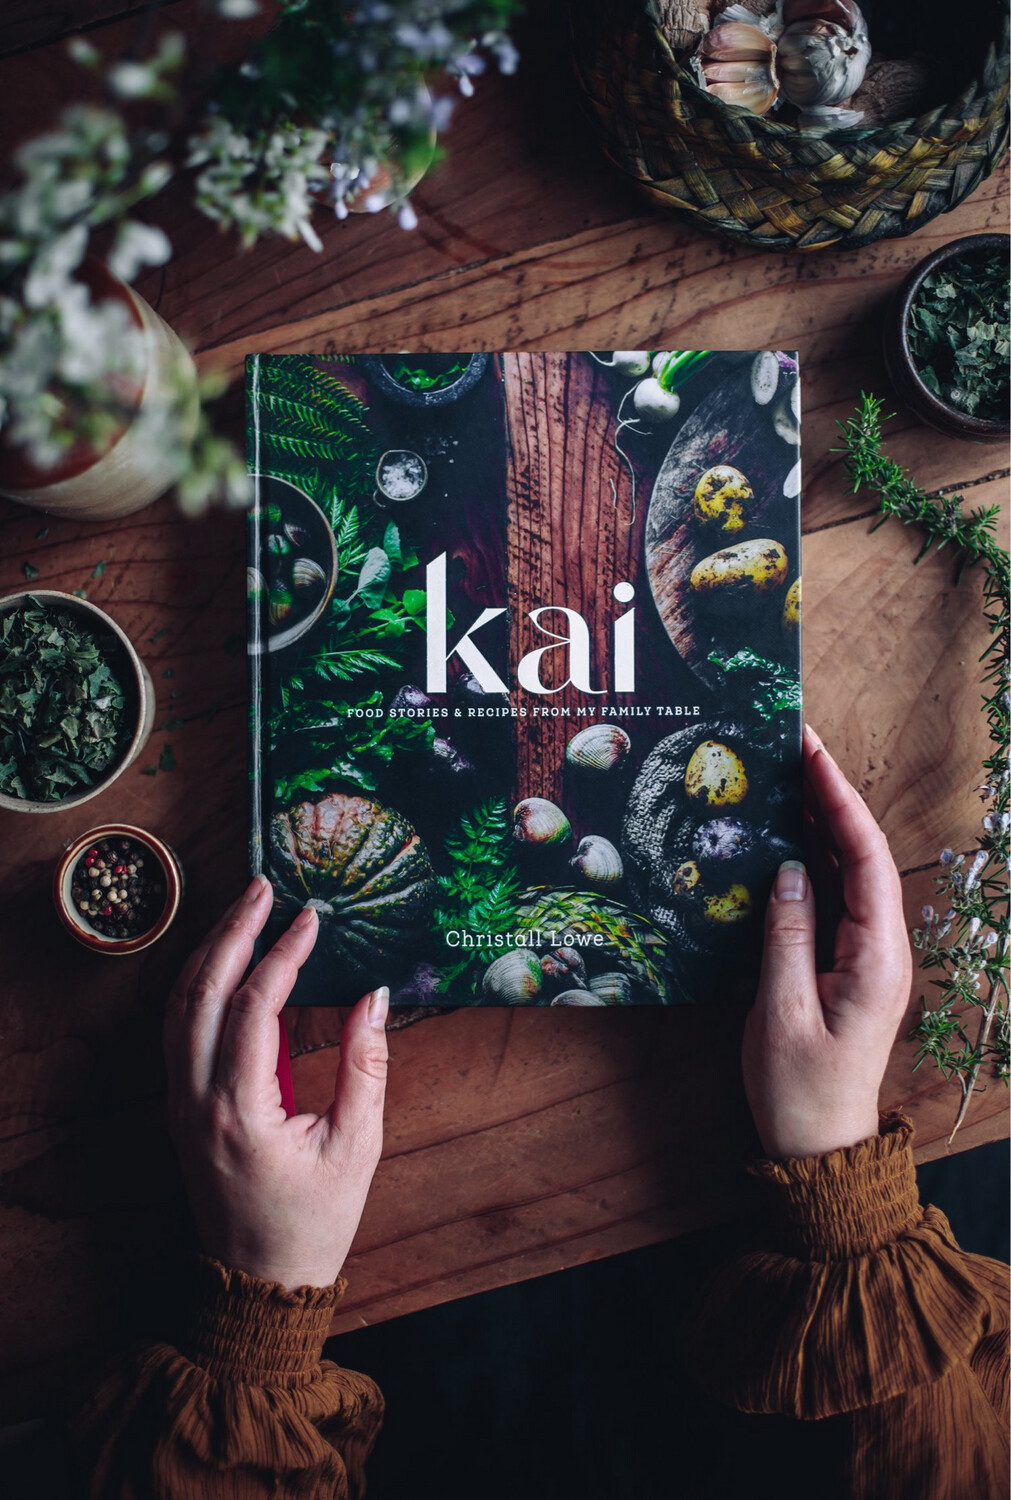 Kai - Food Stories & Recipes From My Family Table